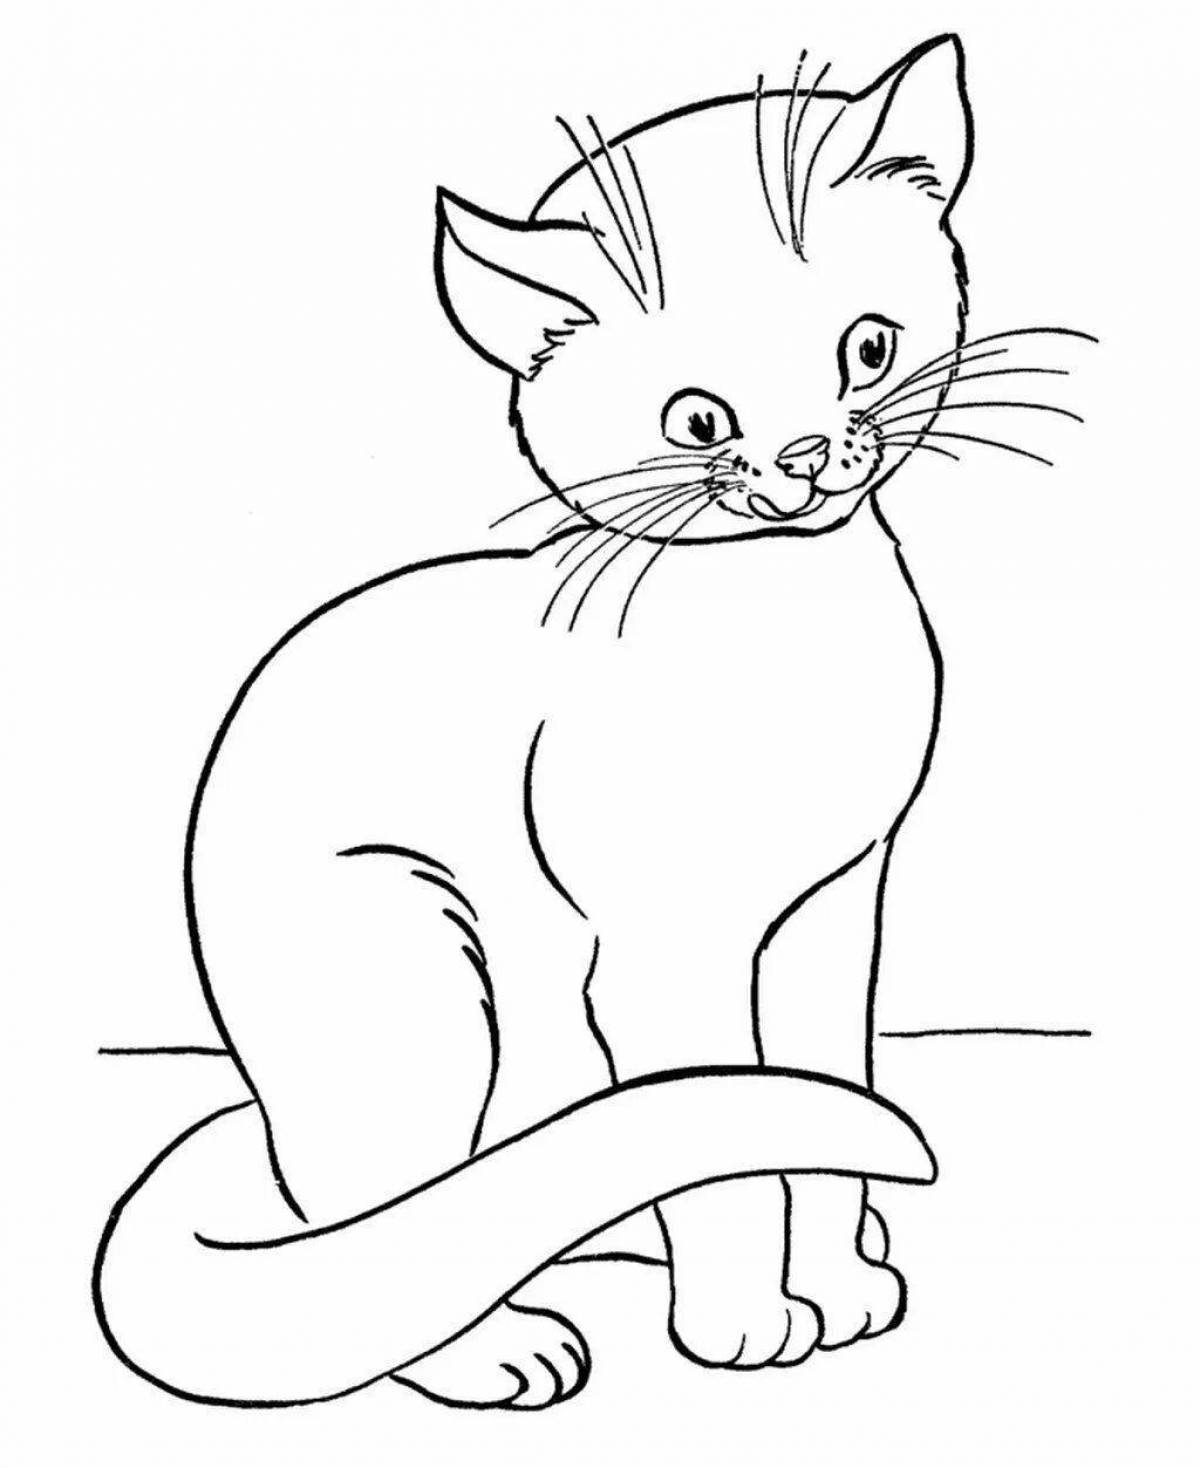 Delightful drawing of a cat